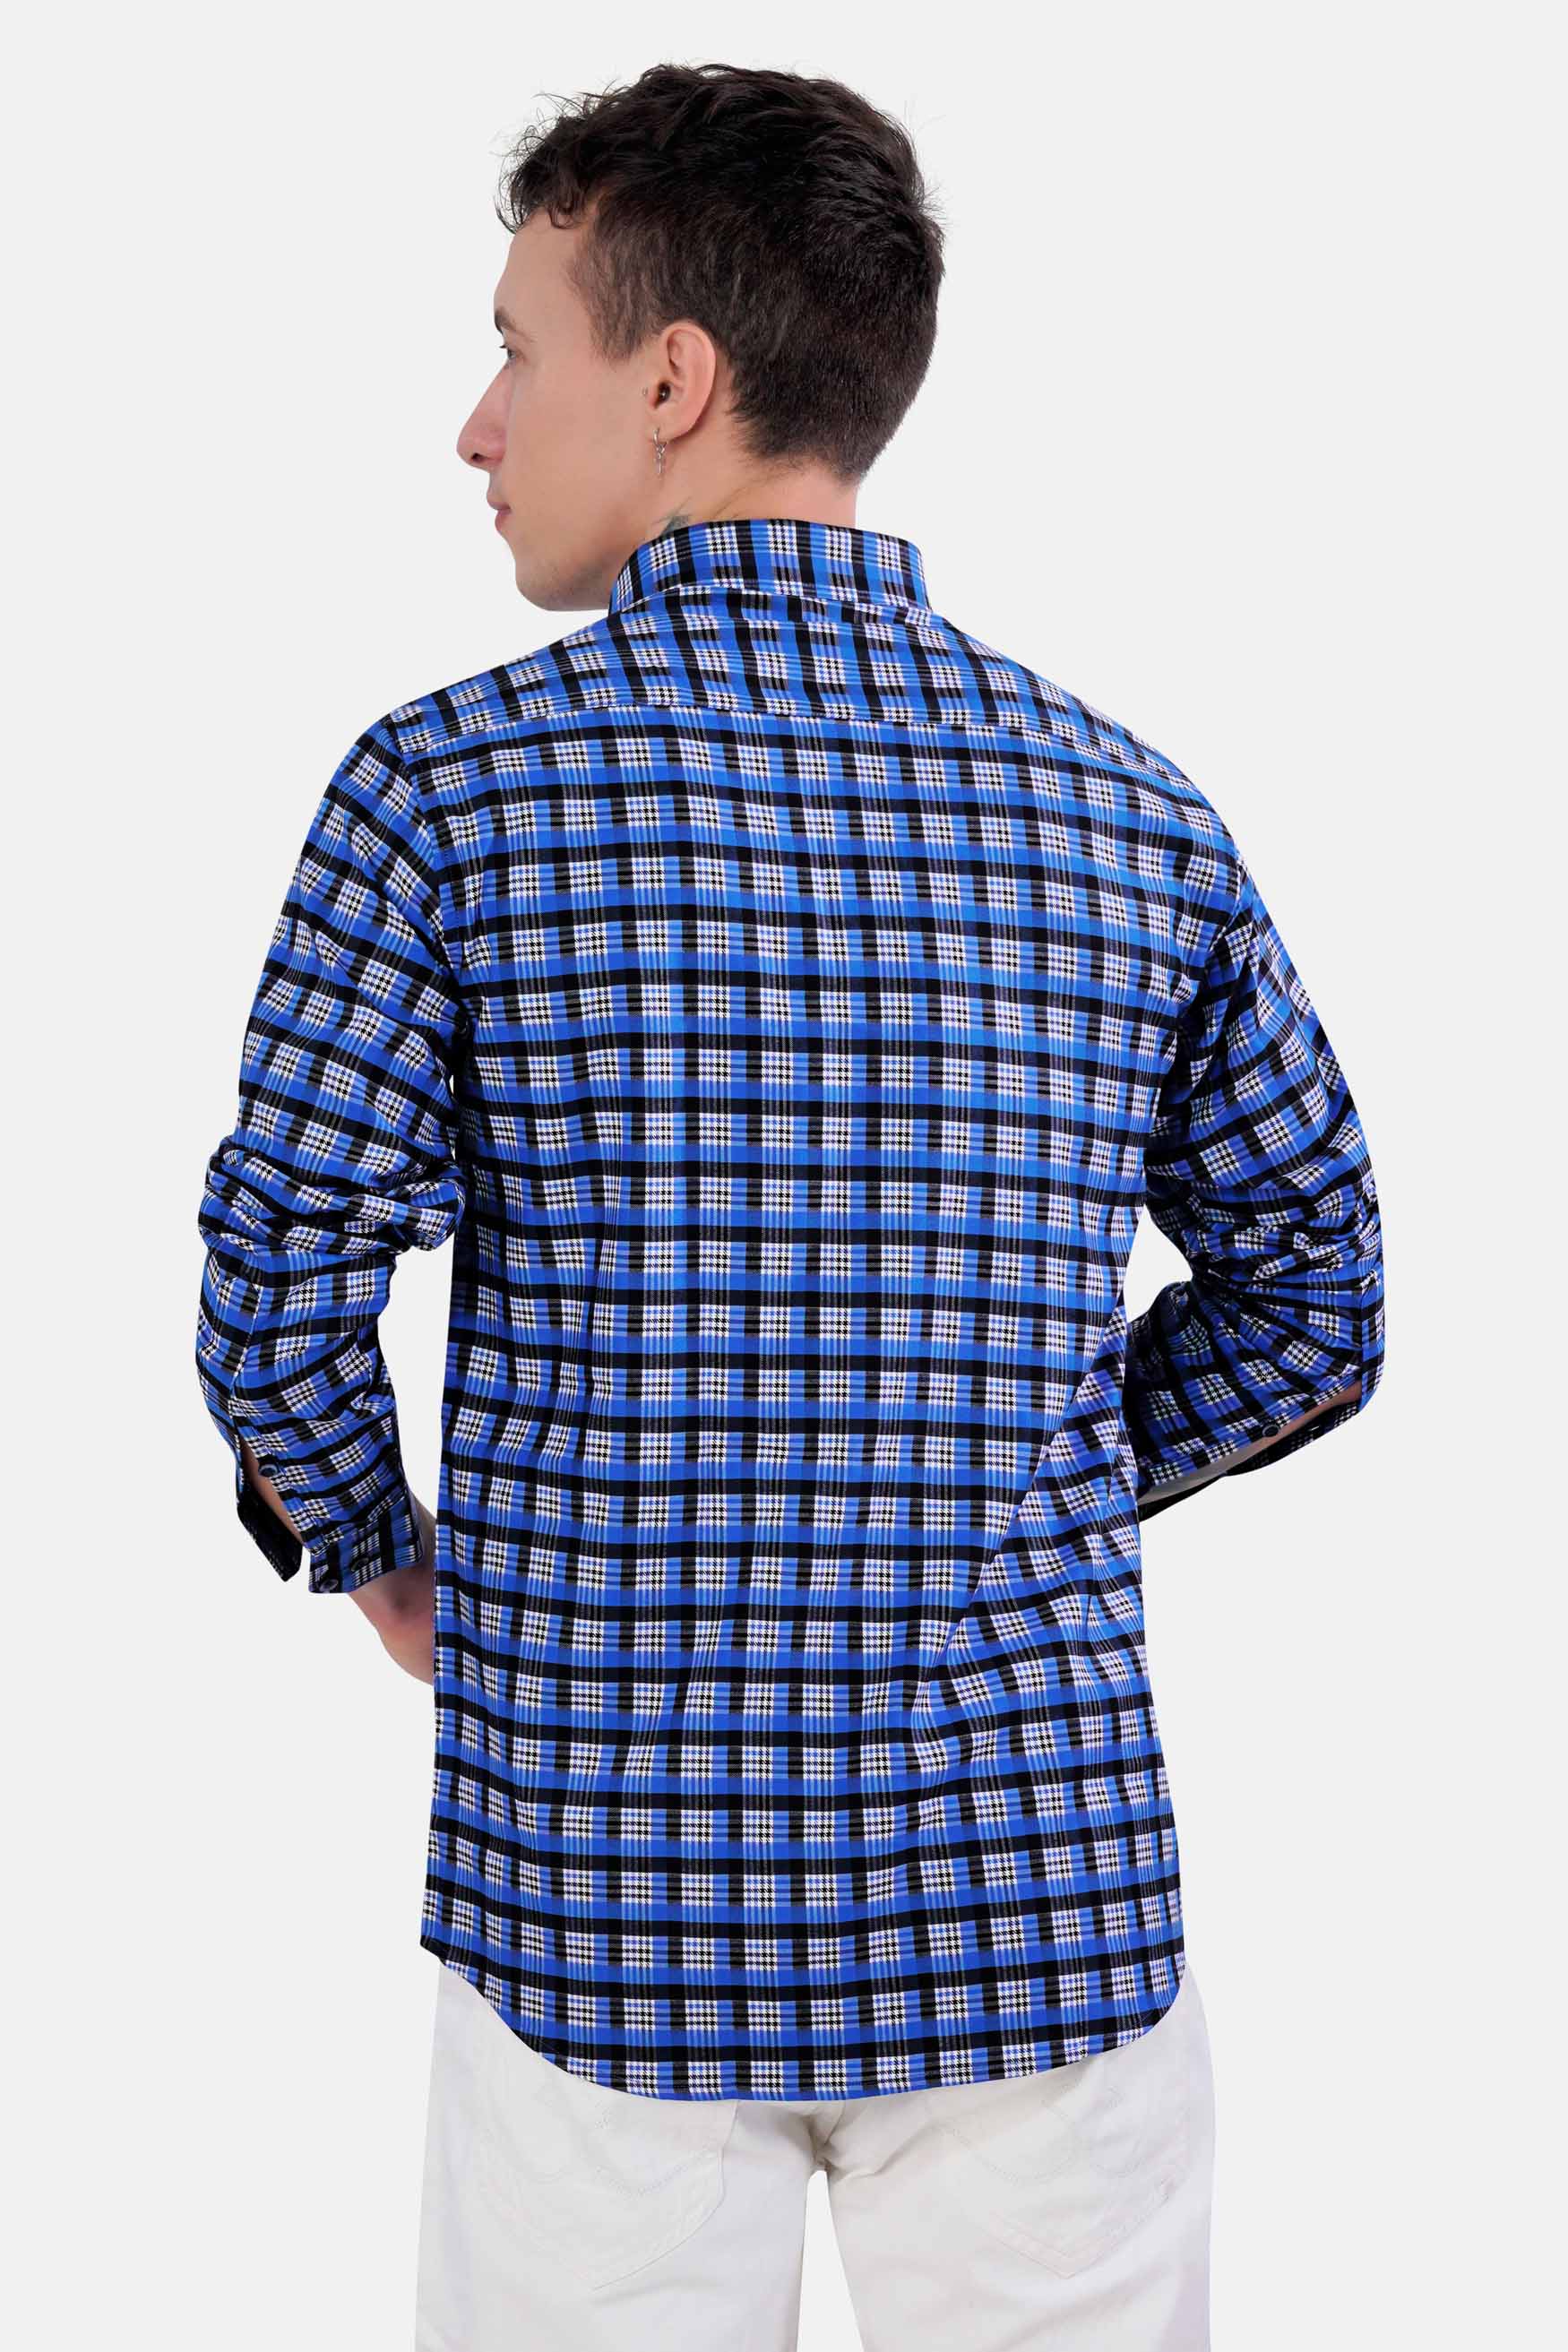 Azul Blue and Black Checkered Houndstooth Shirt 11269-BLE-38, 11269-BLE-H-38, 11269-BLE-39, 11269-BLE-H-39, 11269-BLE-40, 11269-BLE-H-40, 11269-BLE-42, 11269-BLE-H-42, 11269-BLE-44, 11269-BLE-H-44, 11269-BLE-46, 11269-BLE-H-46, 11269-BLE-48, 11269-BLE-H-48, 11269-BLE-50, 11269-BLE-H-50, 11269-BLE-52, 11269-BLE-H-52